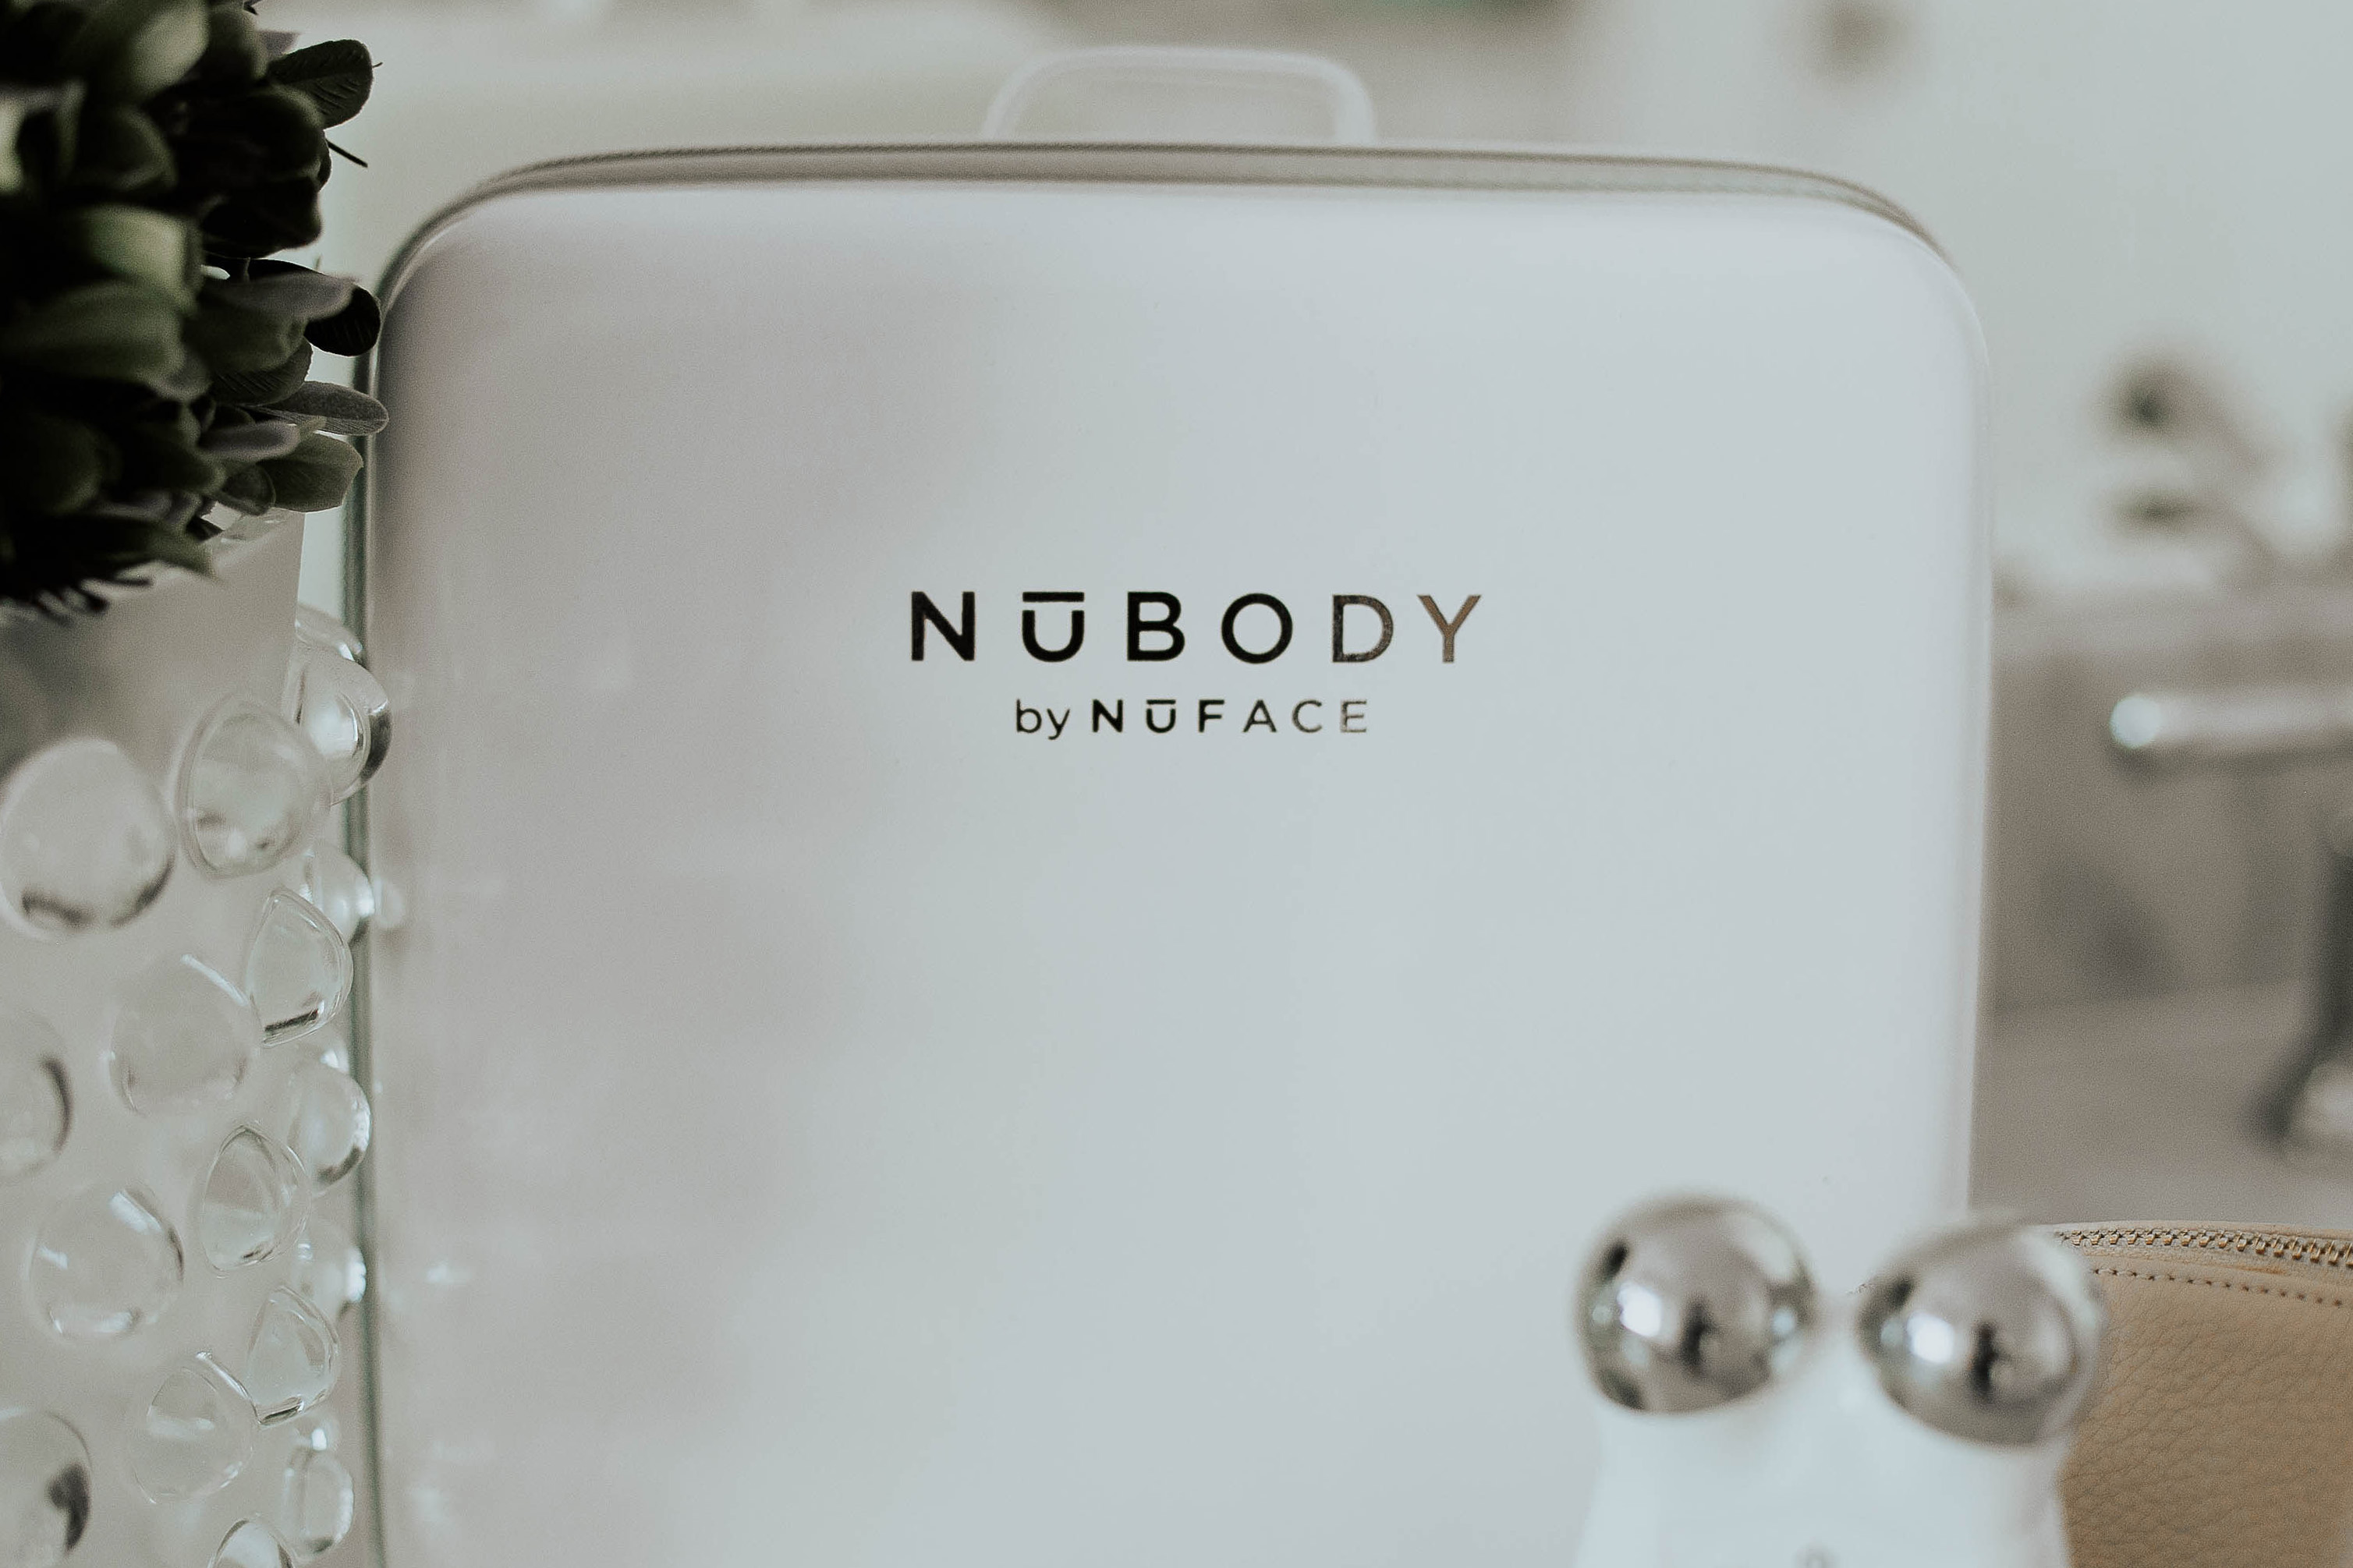 Bloggers Ashley Zeal and Emily Wieczorek from Two Peas in a Prada review the Nubody Skin Toning Device you can use at home. Including an interview with the founder with her tips and tricks.